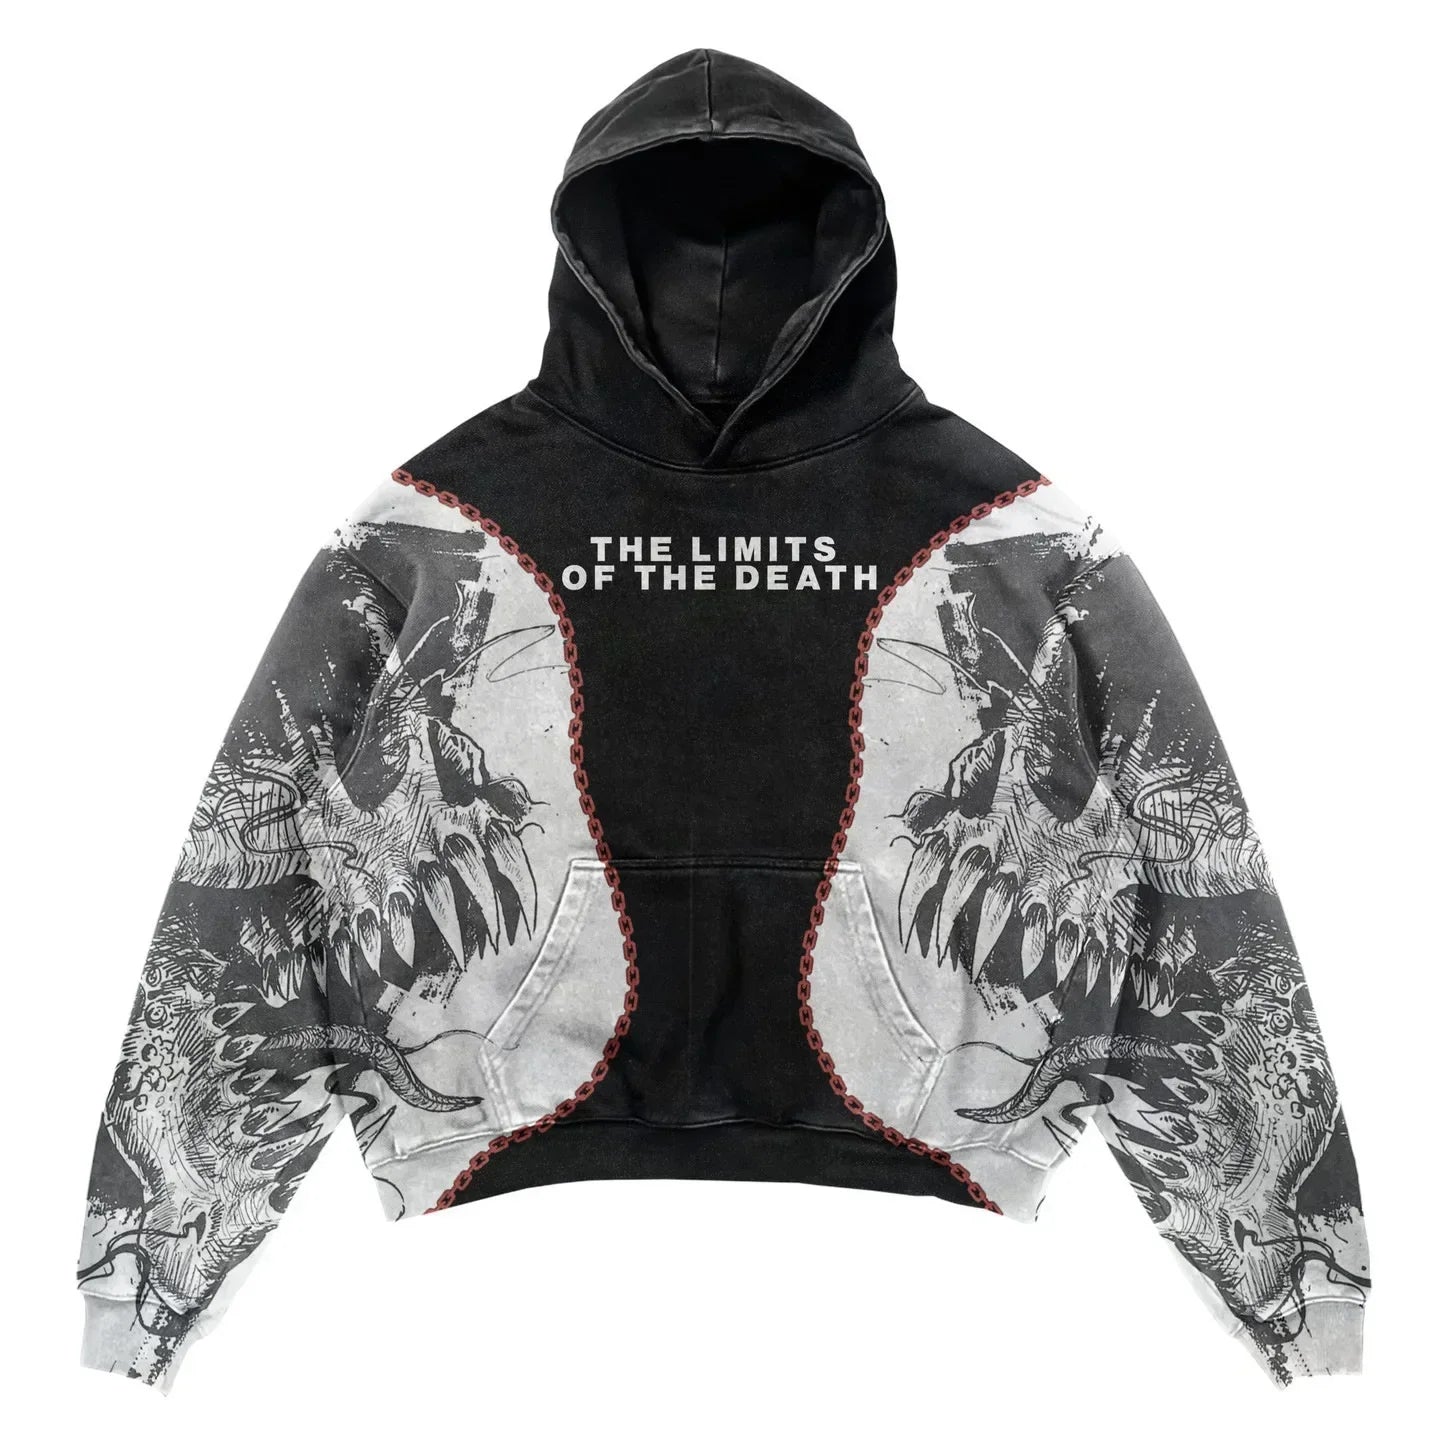 A Maramalive™ Explosions Printed Skull Y2K Retro Hooded Sweater Coat Street Style Gothic Casual Fashion Hooded Sweater Men's Female with white text "THE LIMITS OF THE DEATH" on the chest, featuring detailed graphic designs of monstrous skulls and teeth on the front and sleeves. Perfect for men who love punk style hoodies.